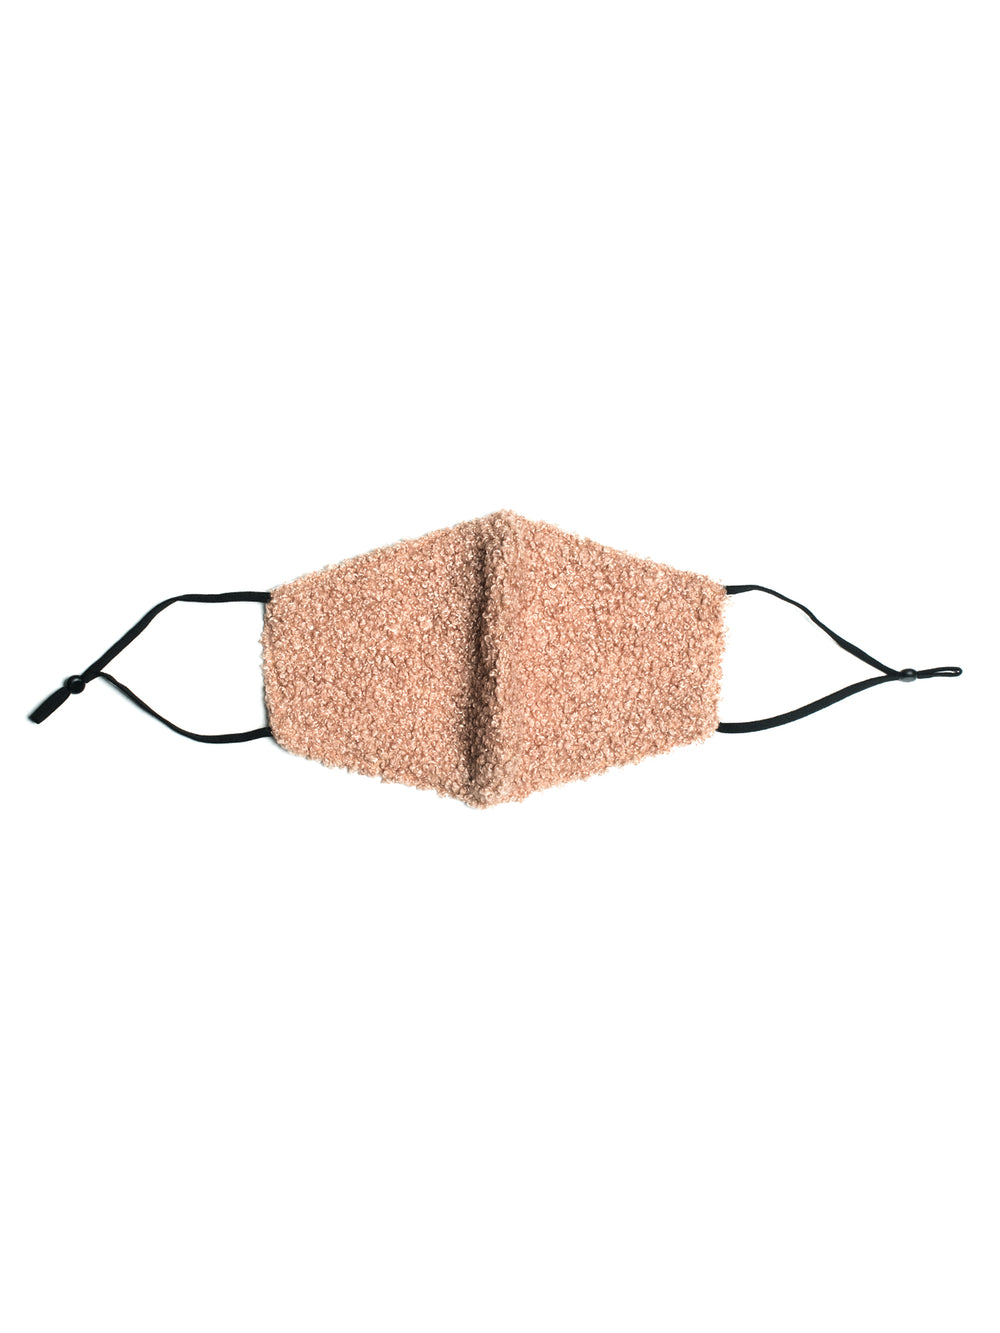 KW FASHION CORP TEDDY MASK - CAMEL - CLEARANCE